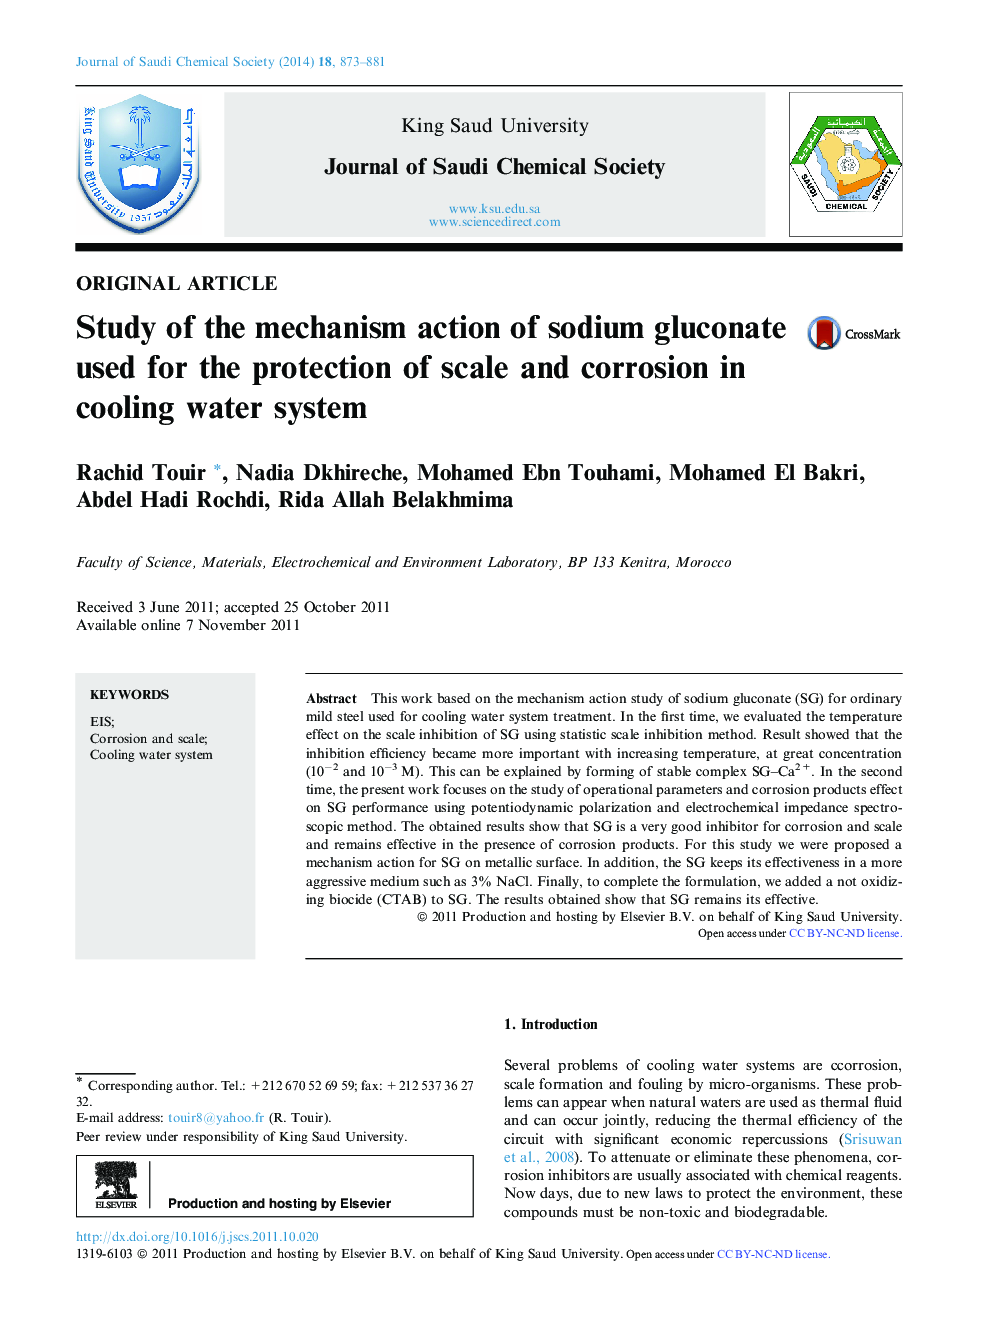 Study of the mechanism action of sodium gluconate used for the protection of scale and corrosion in cooling water system 